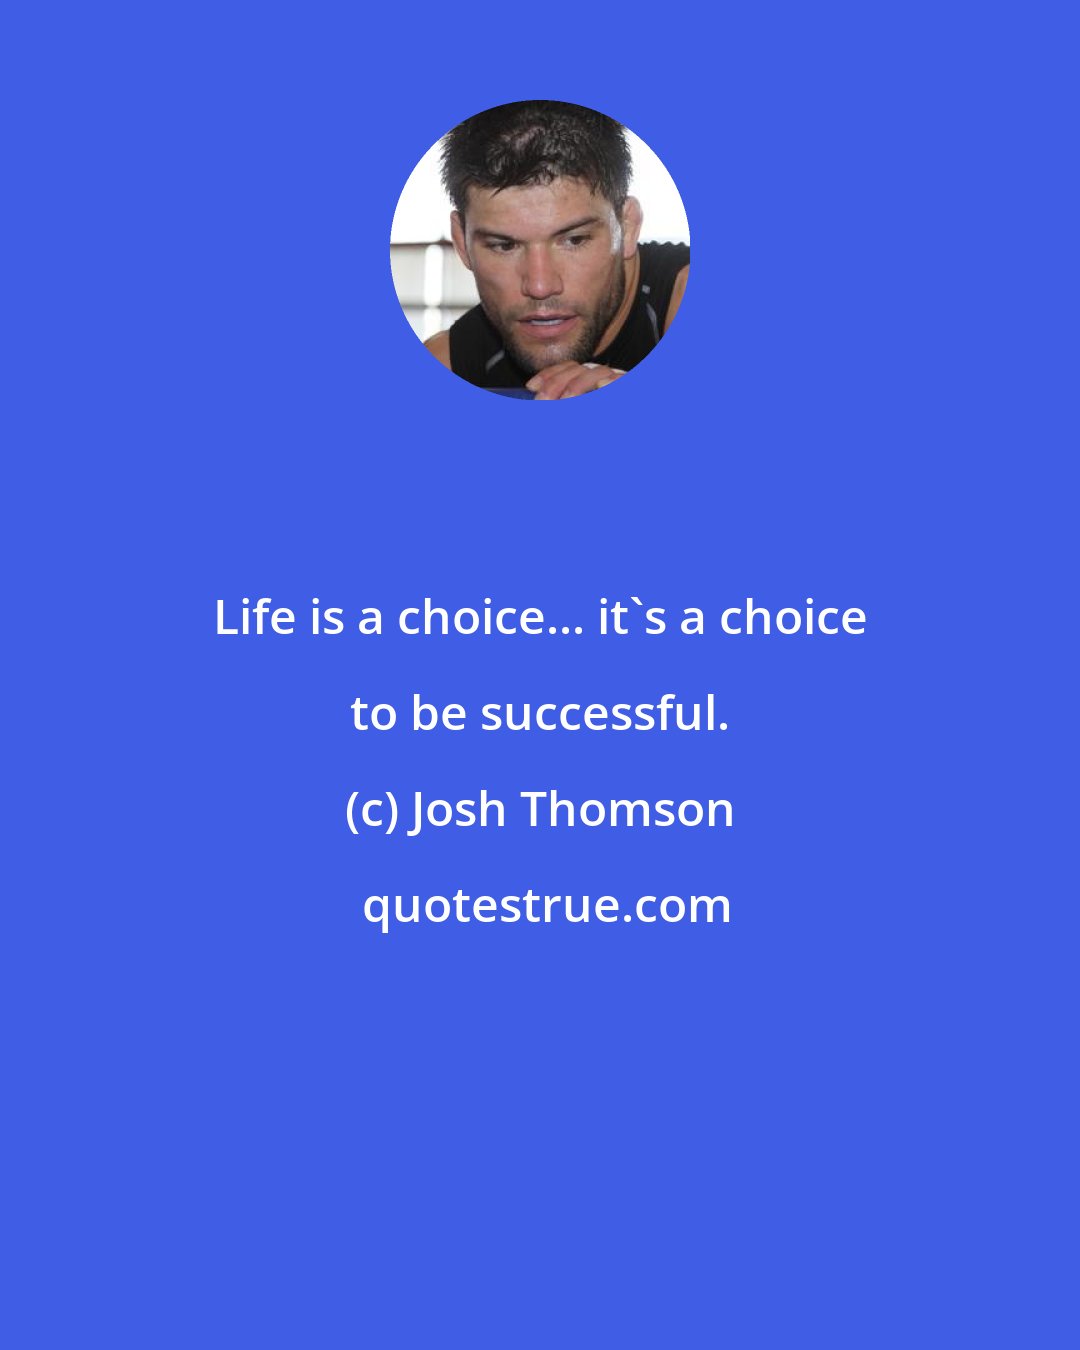 Josh Thomson: Life is a choice... it's a choice to be successful.